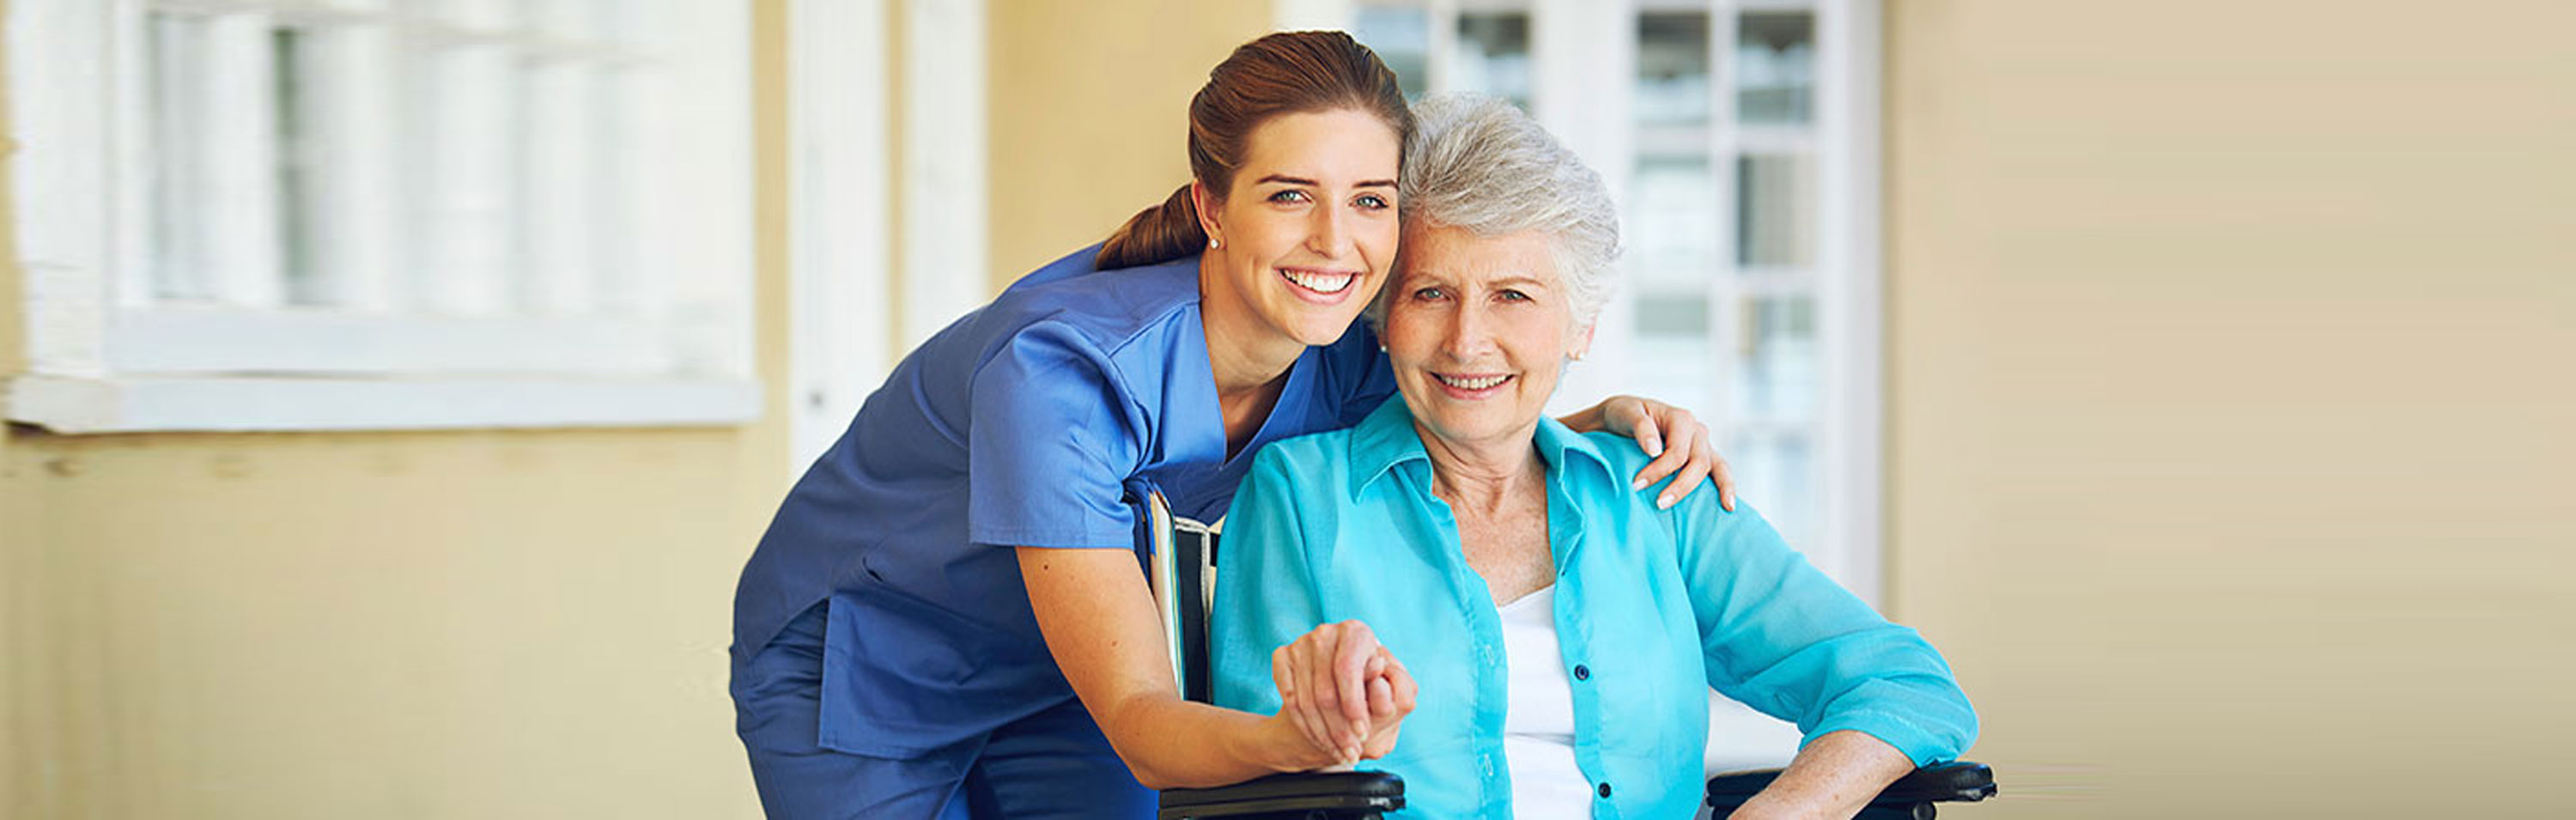 Home Nursing Care Services in Sydney, Home Nursing Care Services in Sydney